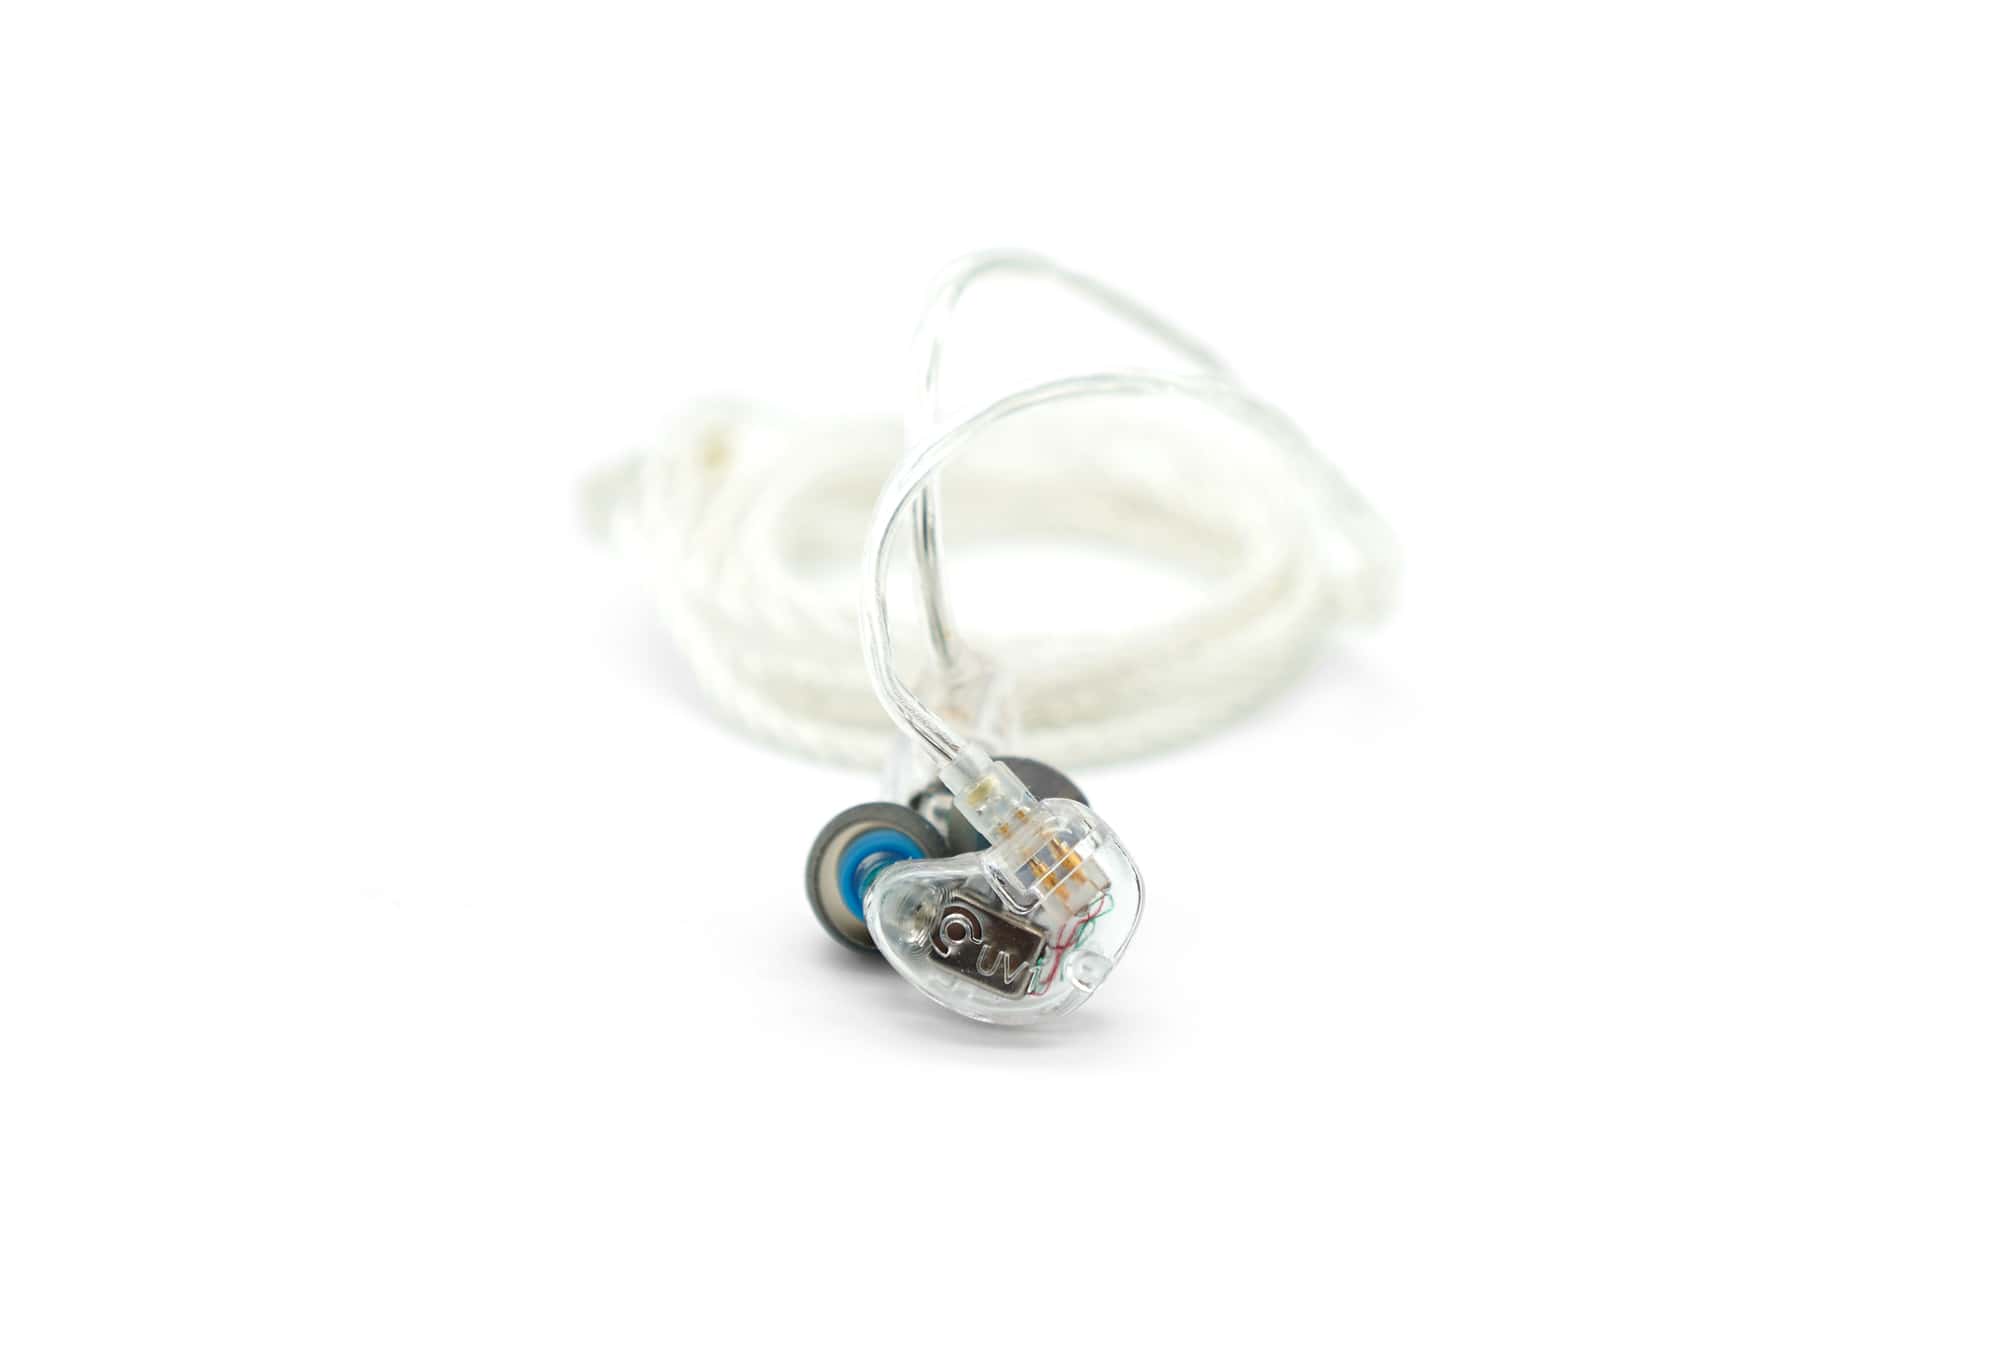 UV1 universal fit single driver in-ear monitor for stage musicians and music listening - un-nested view